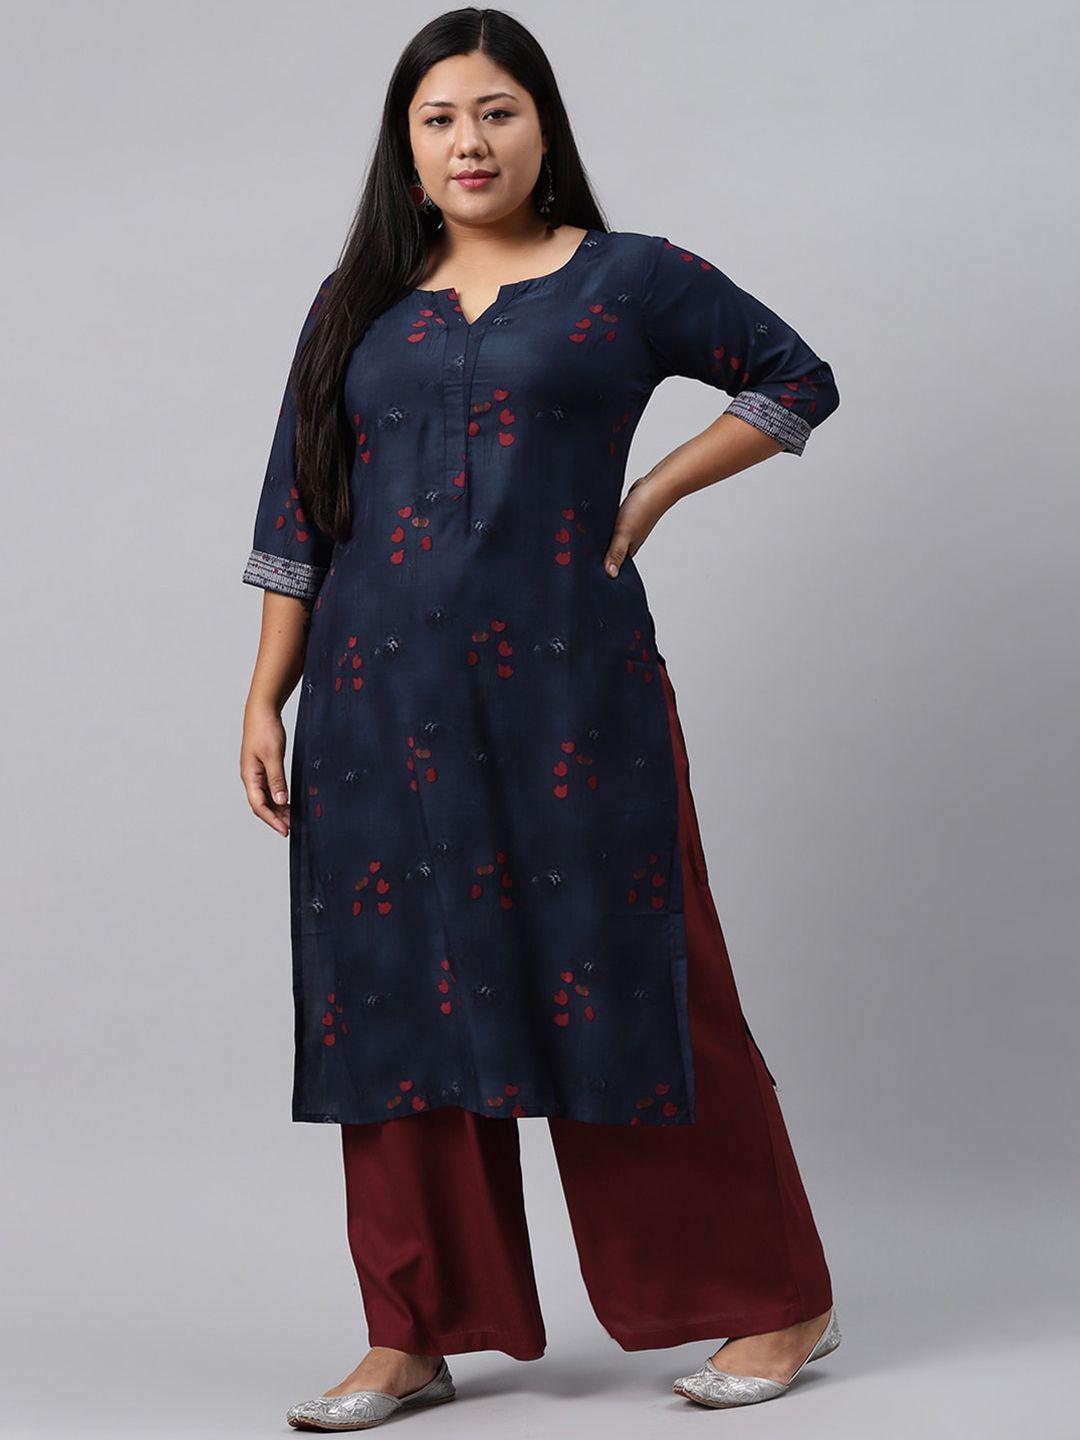 extra love by libas plus size women navy blue & red floral printed kurta